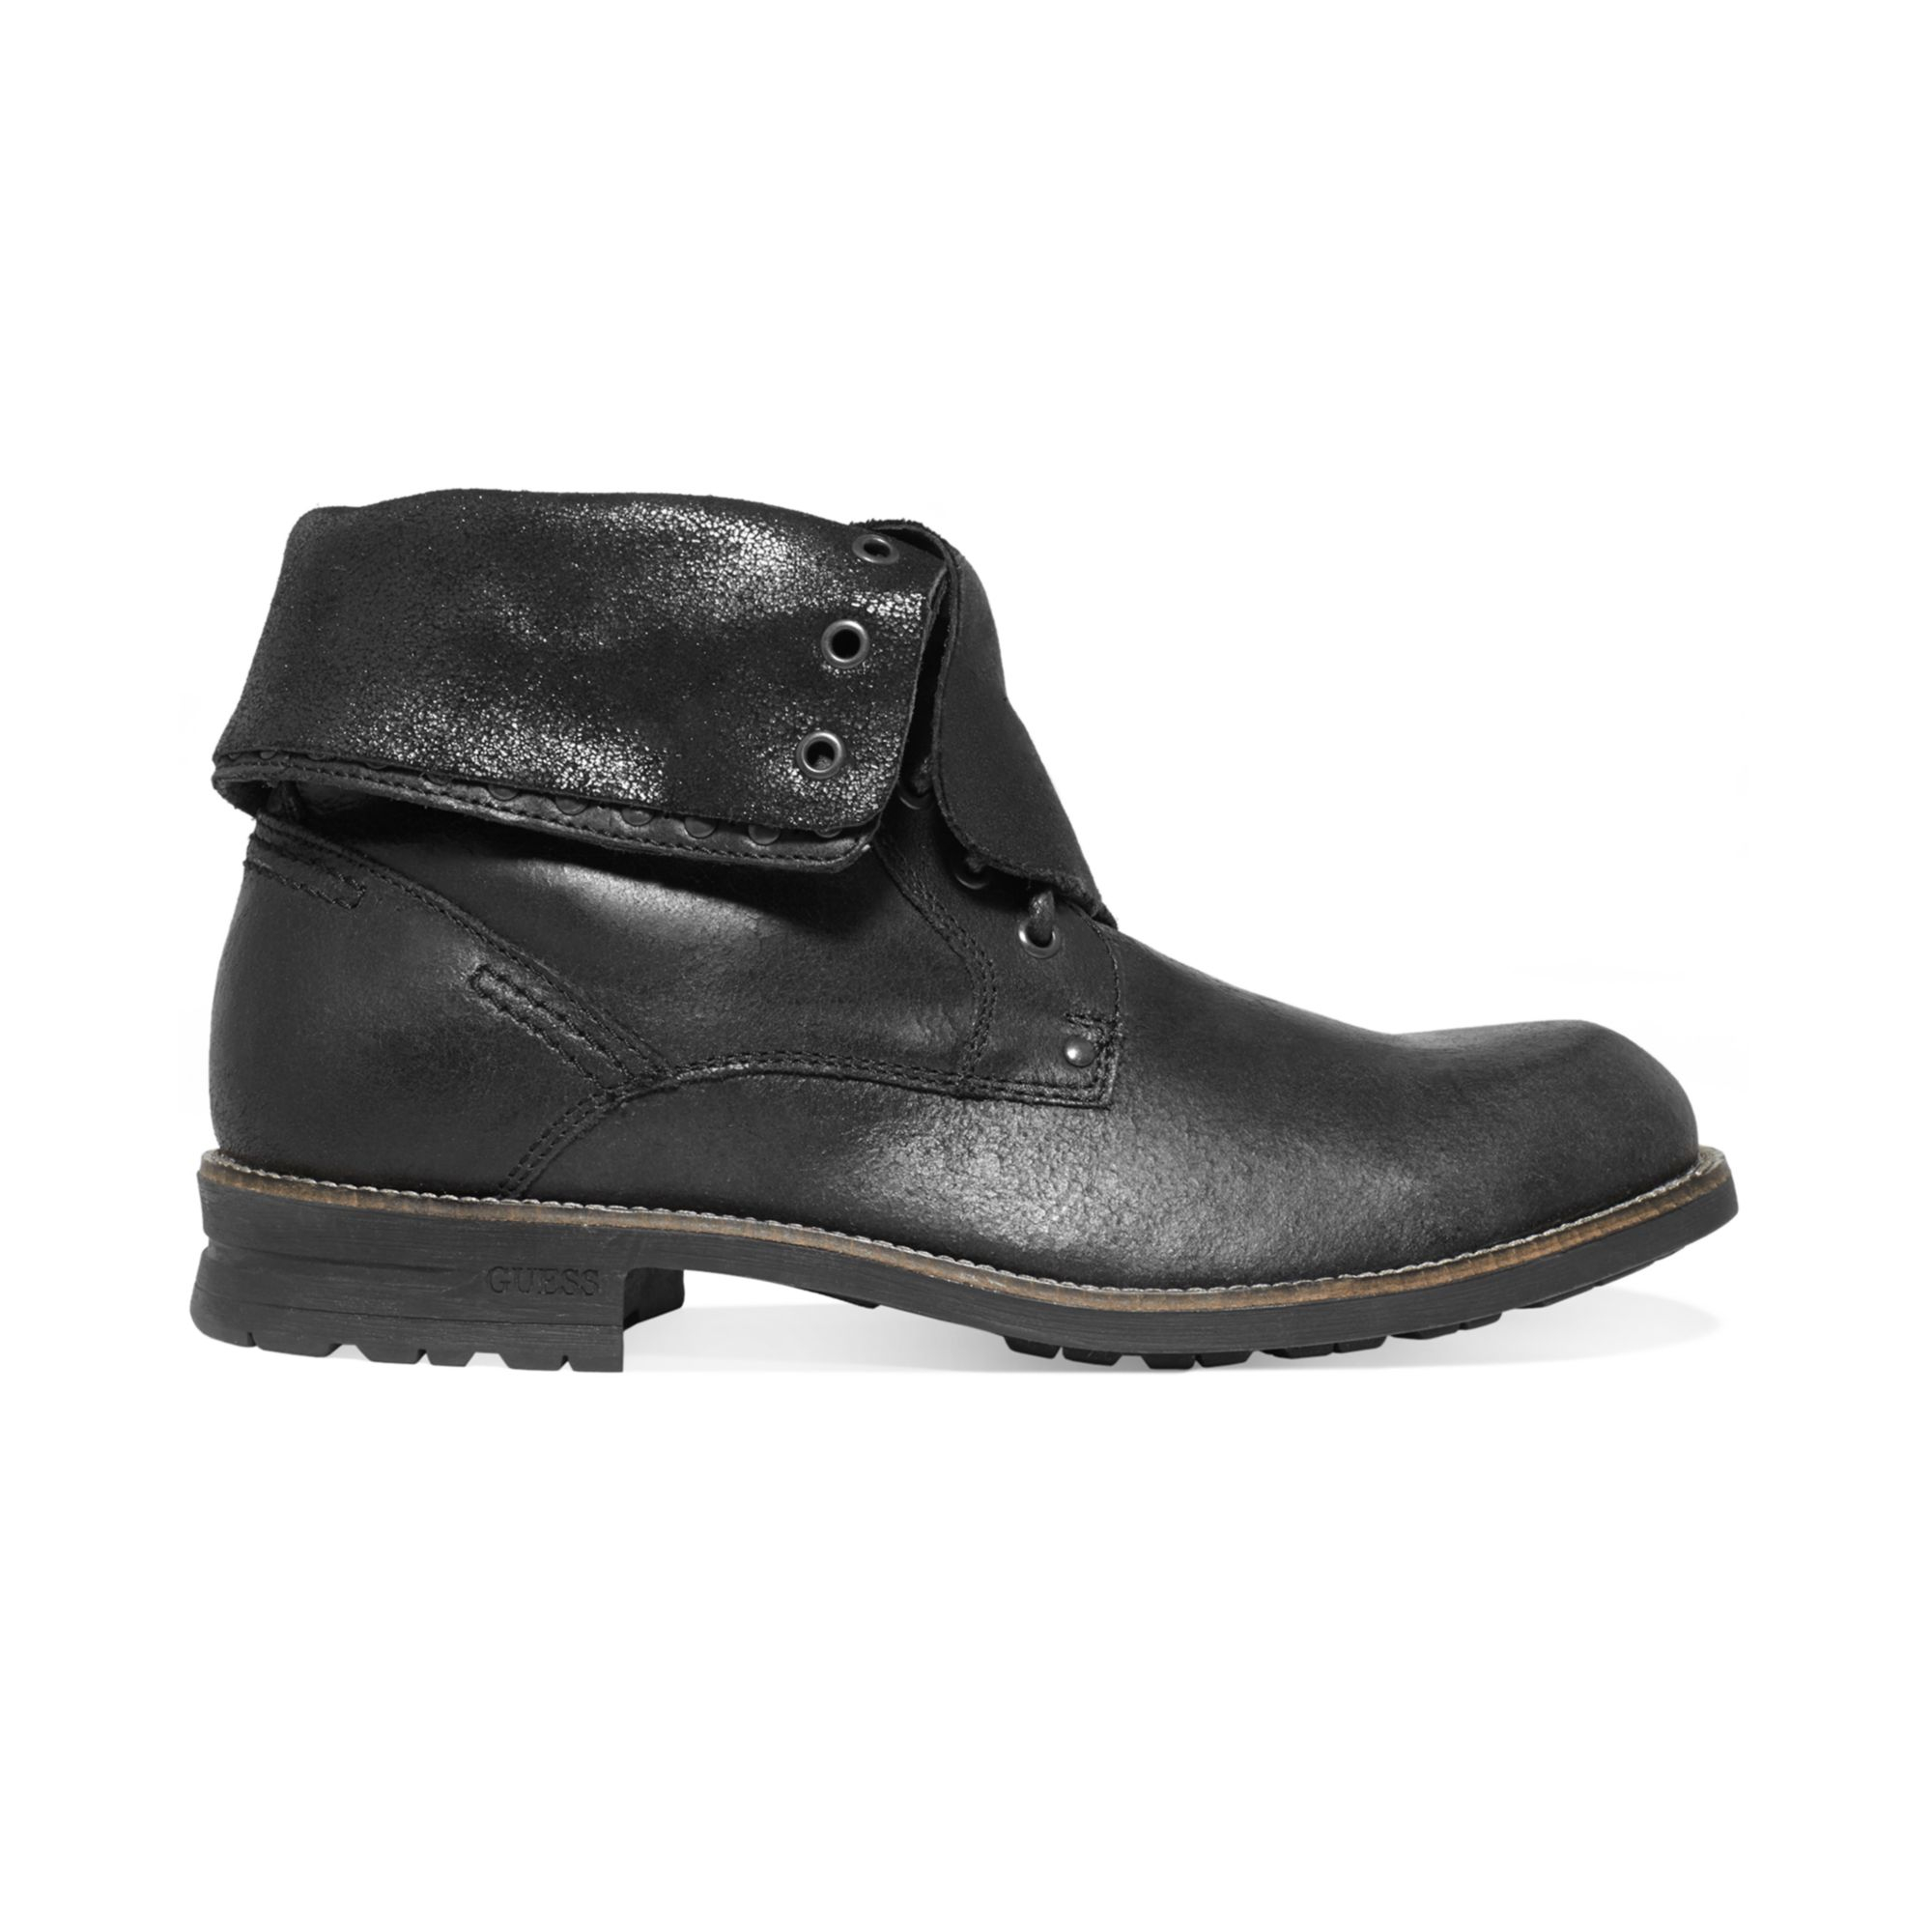 Lyst - Guess Mens Shoes Differ Boots in Black for Men